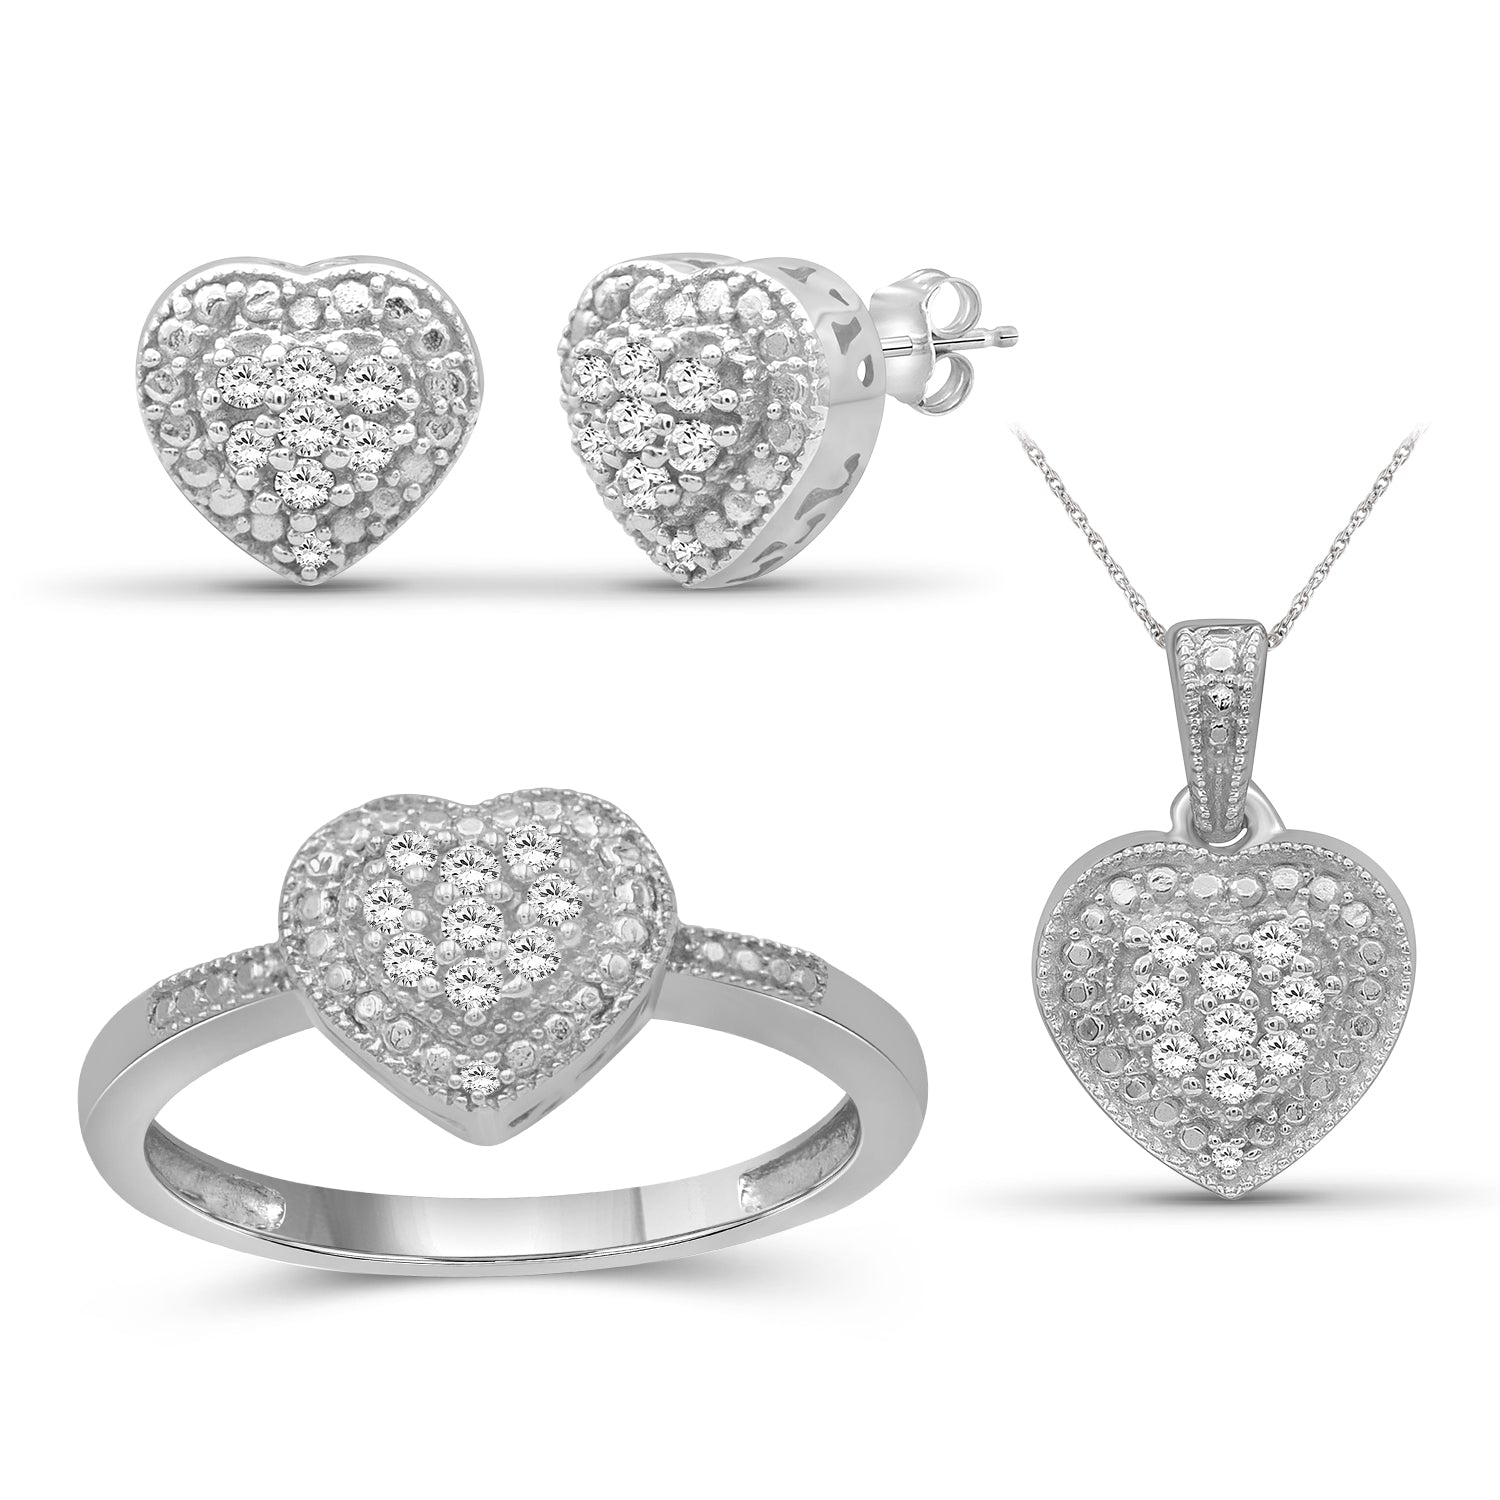 3-Piece 1/3 Carat White Diamond Sterling Silver Earrings Set, Sterling Silver Necklace, Sterling Silver Rings – Heart Shaped Jewelry